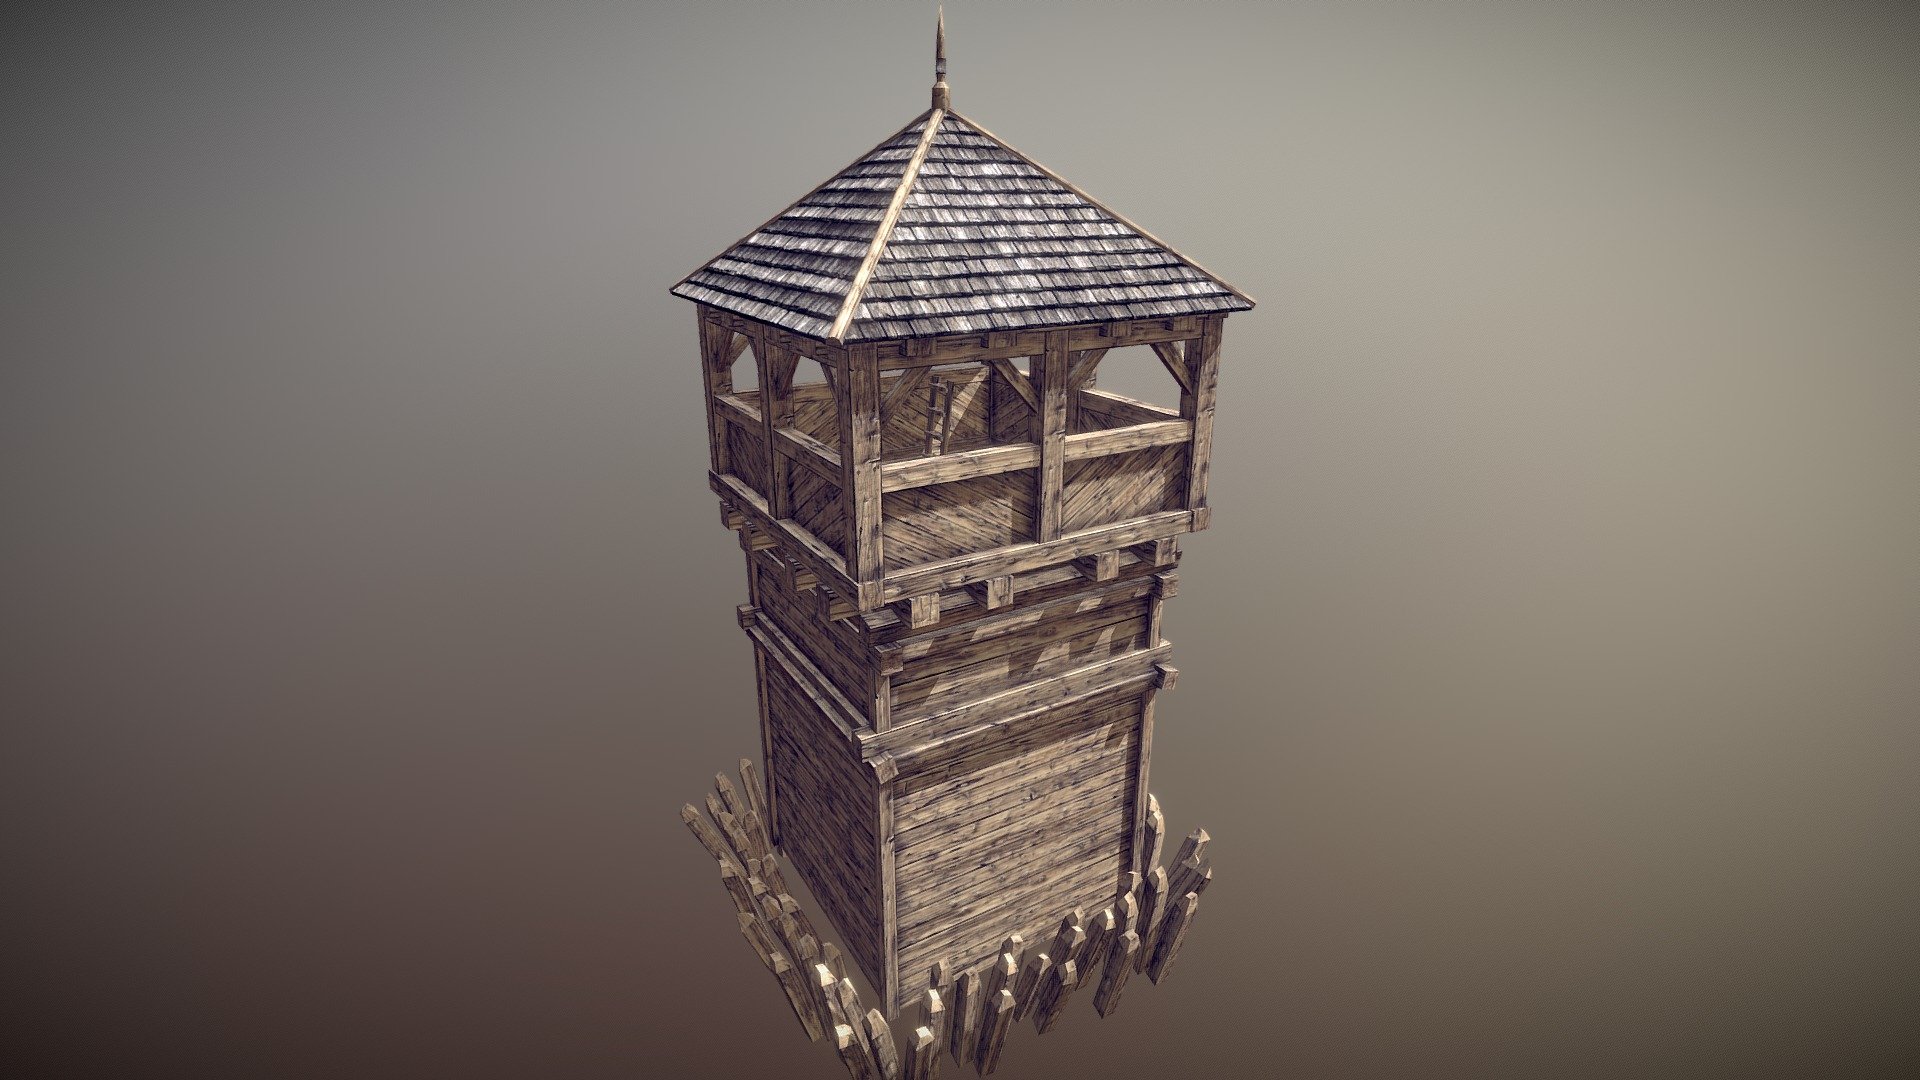 Defence Tower for a city builder game set in the time of the first colonial settlements in America - LV2 Defence Tower Mesh - 3D model by Jonny Shields (@jonnyshields) 3d model